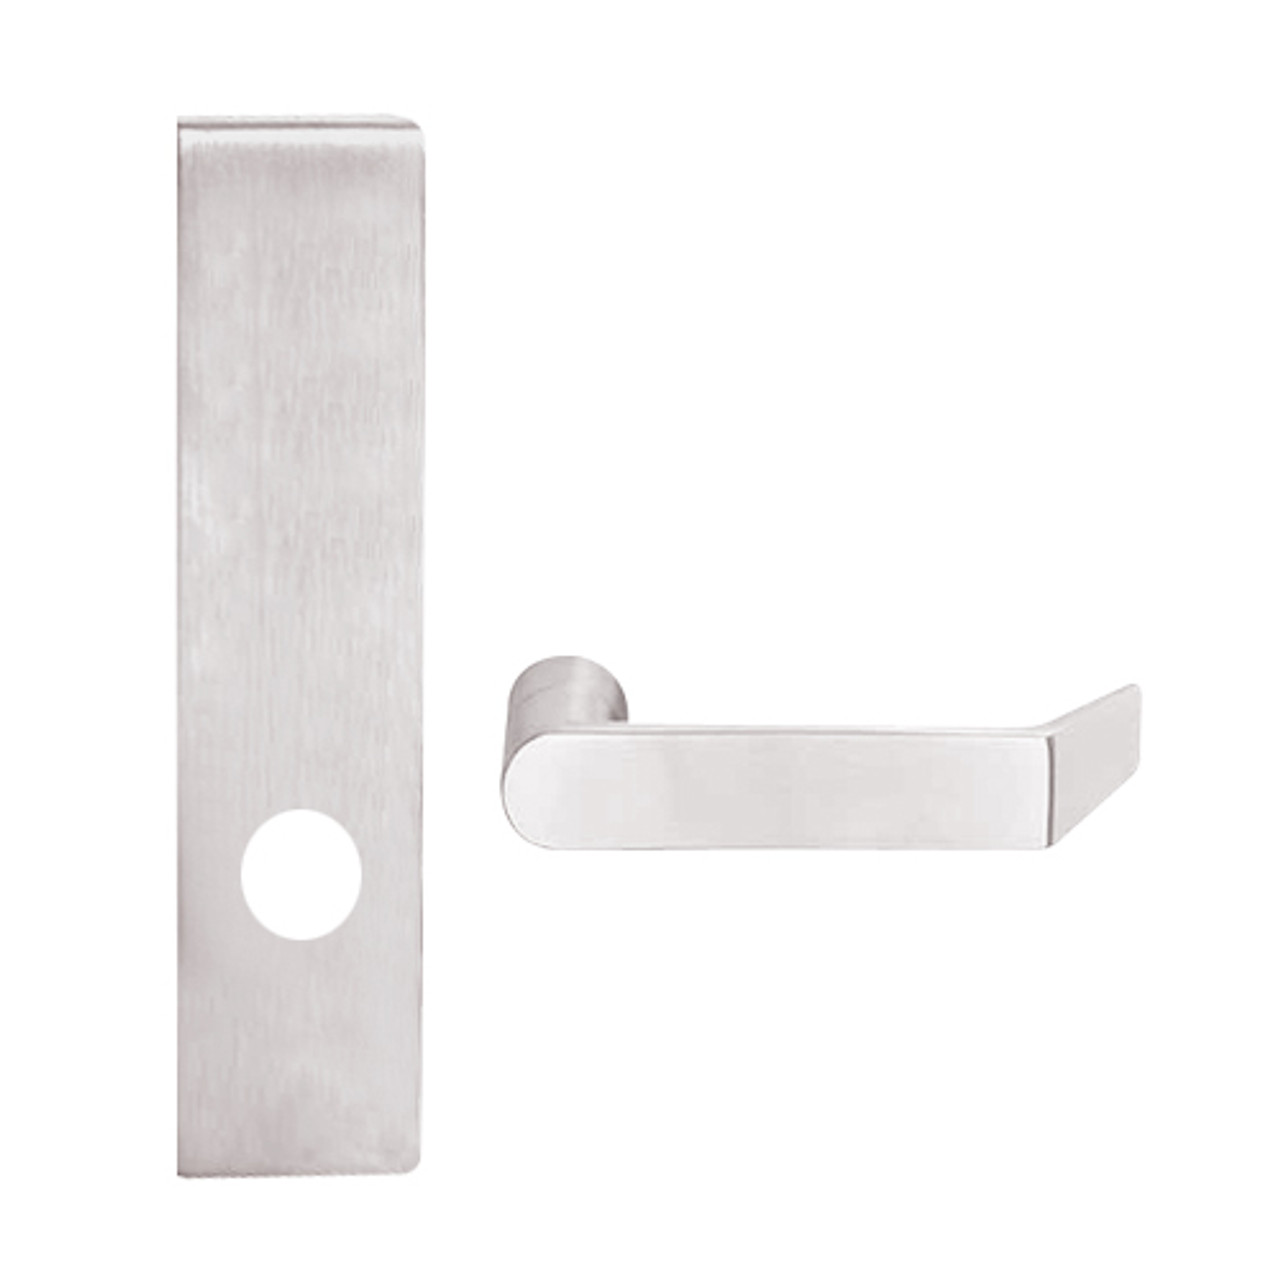 L9010-06L-629 Schlage L Series Passage Latch Commercial Mortise Lock with 06 Cast Lever Design in Bright Stainless Steel